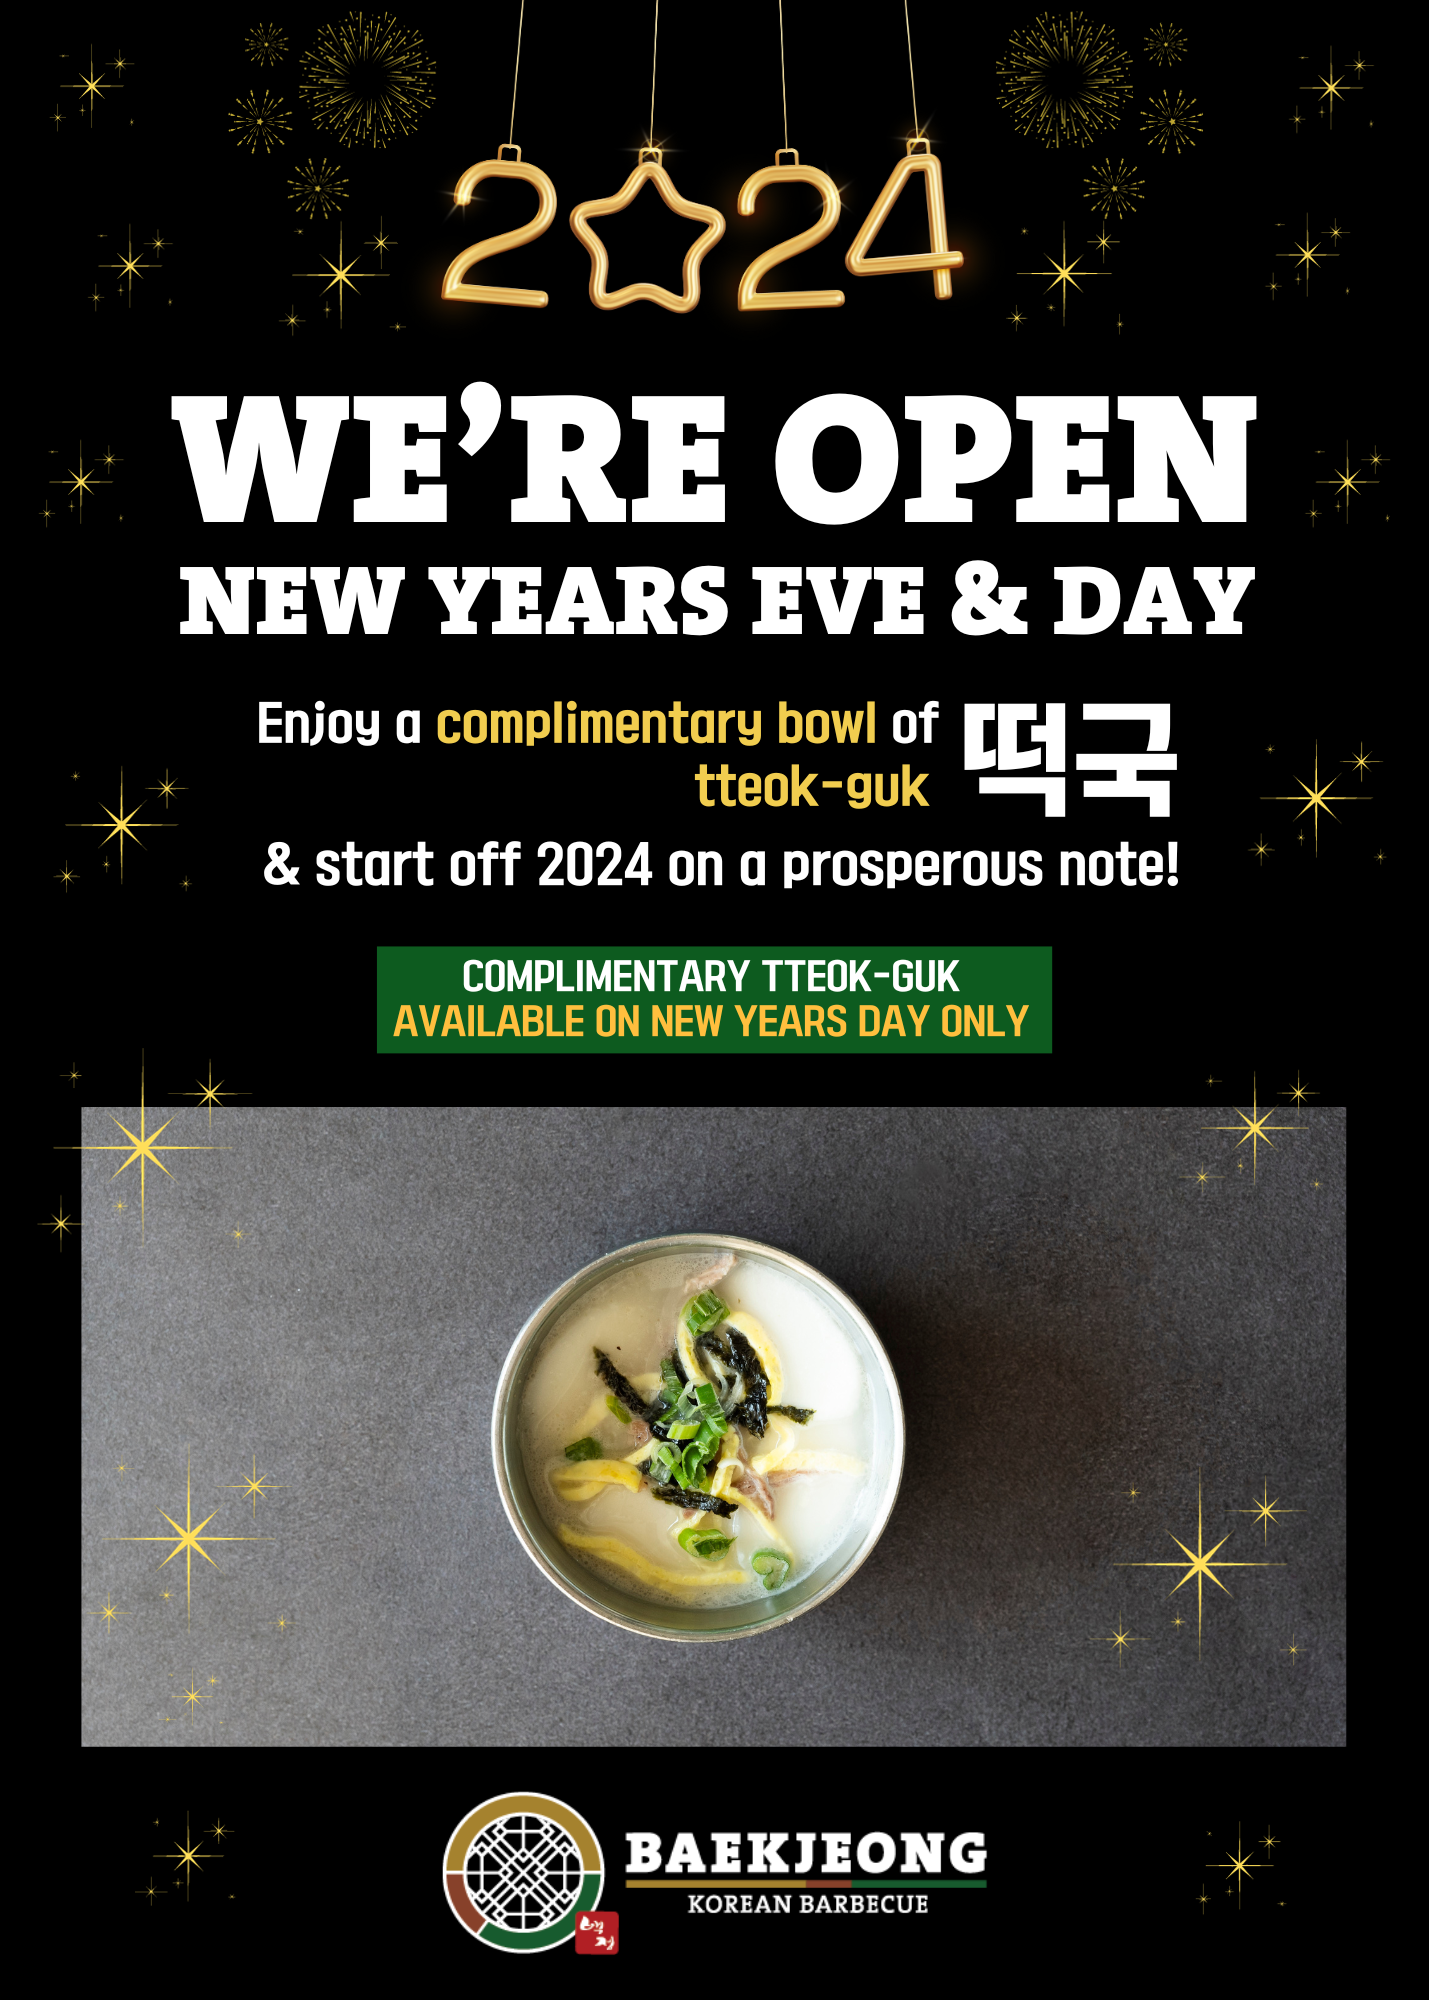 We're open new years eve & day. Enjoy a complimentary bowl of tteok-guk & start off 2024 on a prosperous note! Complimentary tteok-guk available on new years day only